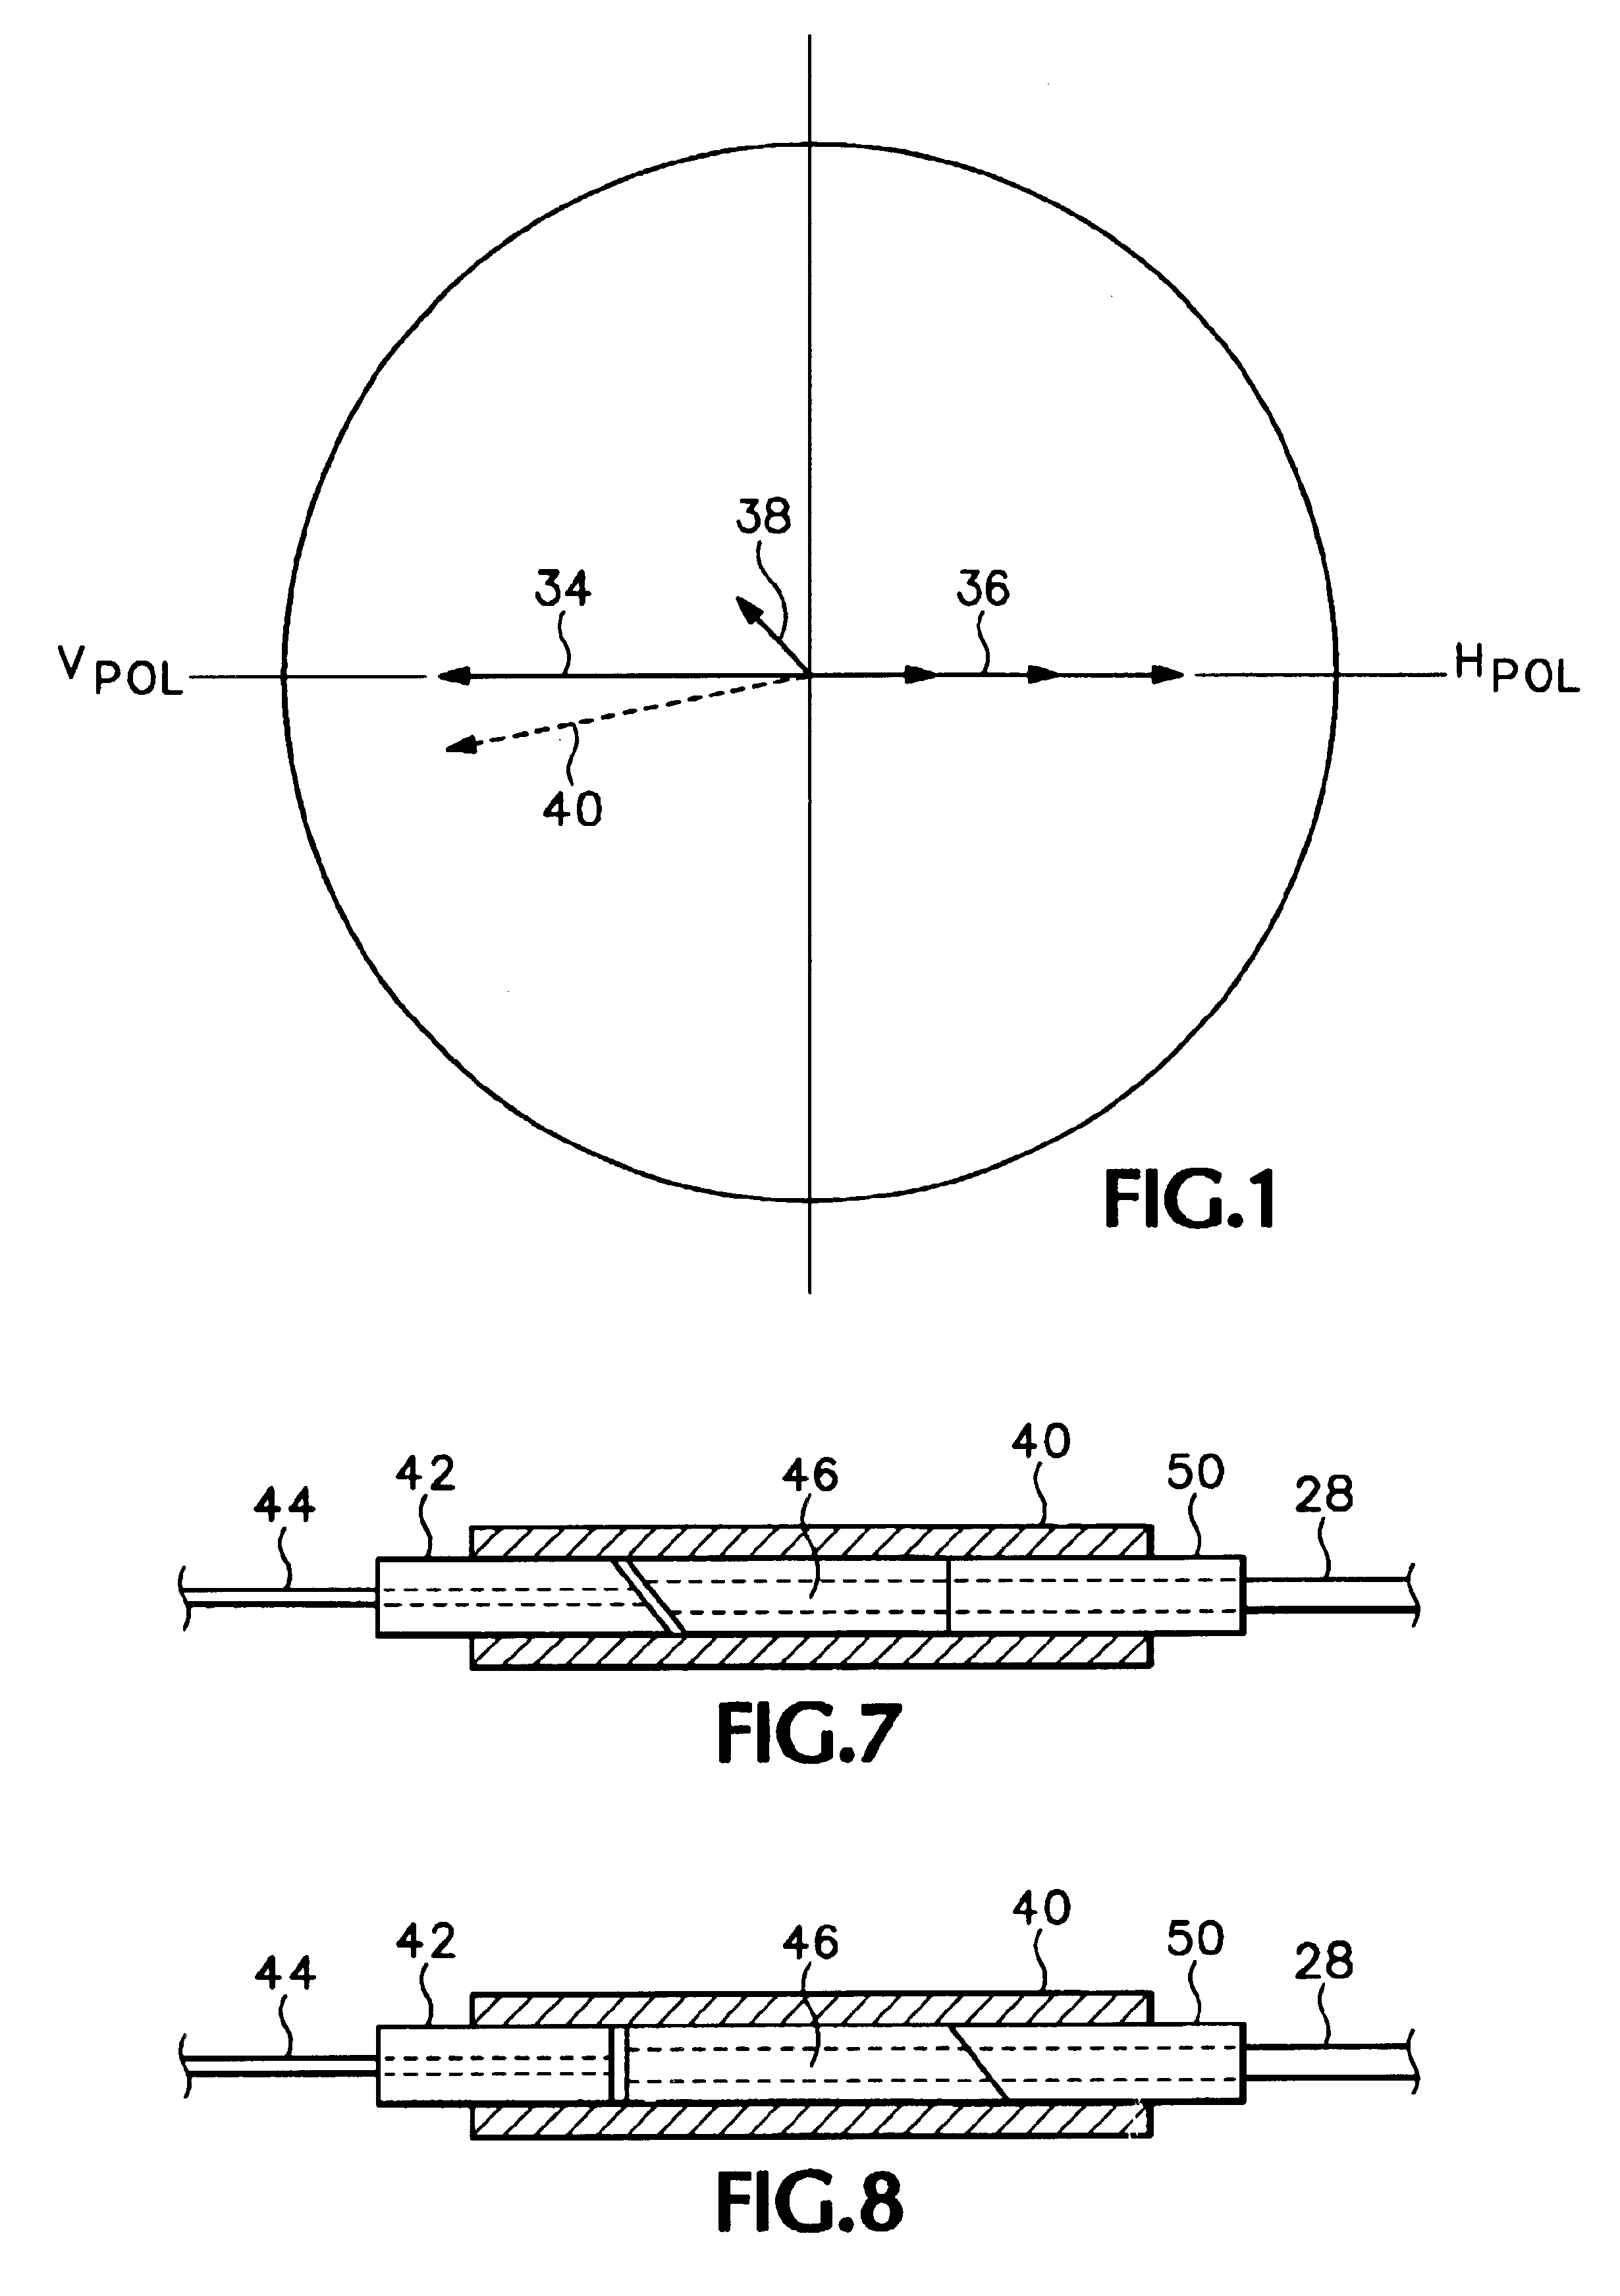 Fiber-pigtailed assembly